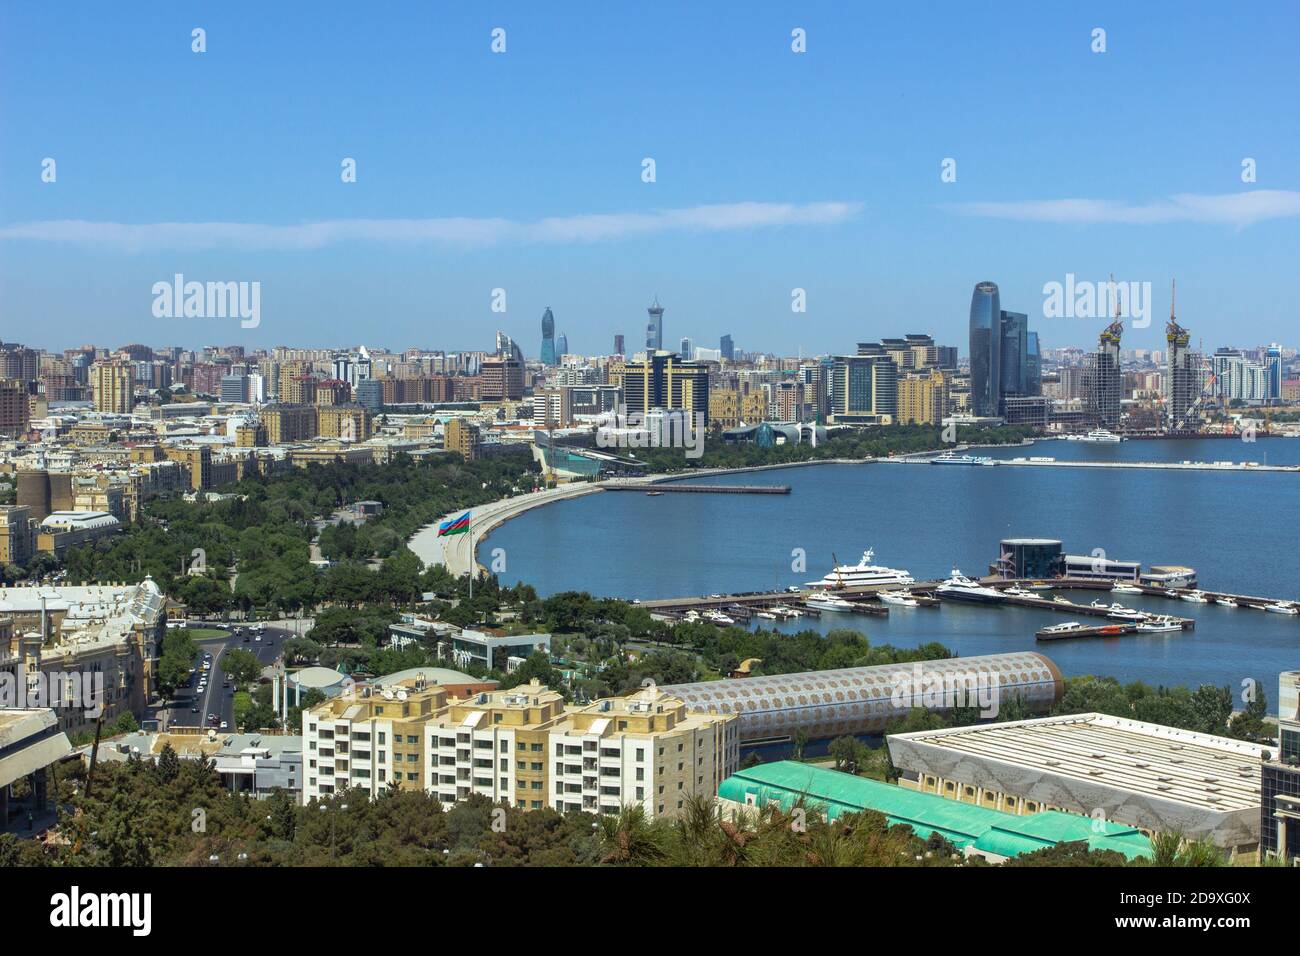 Panoramic view of Baku, the capital and largest city of Azerbaijan situated on the Caspian Sea and in the Caucasus region. Bay of Baku. Urban city Stock Photo